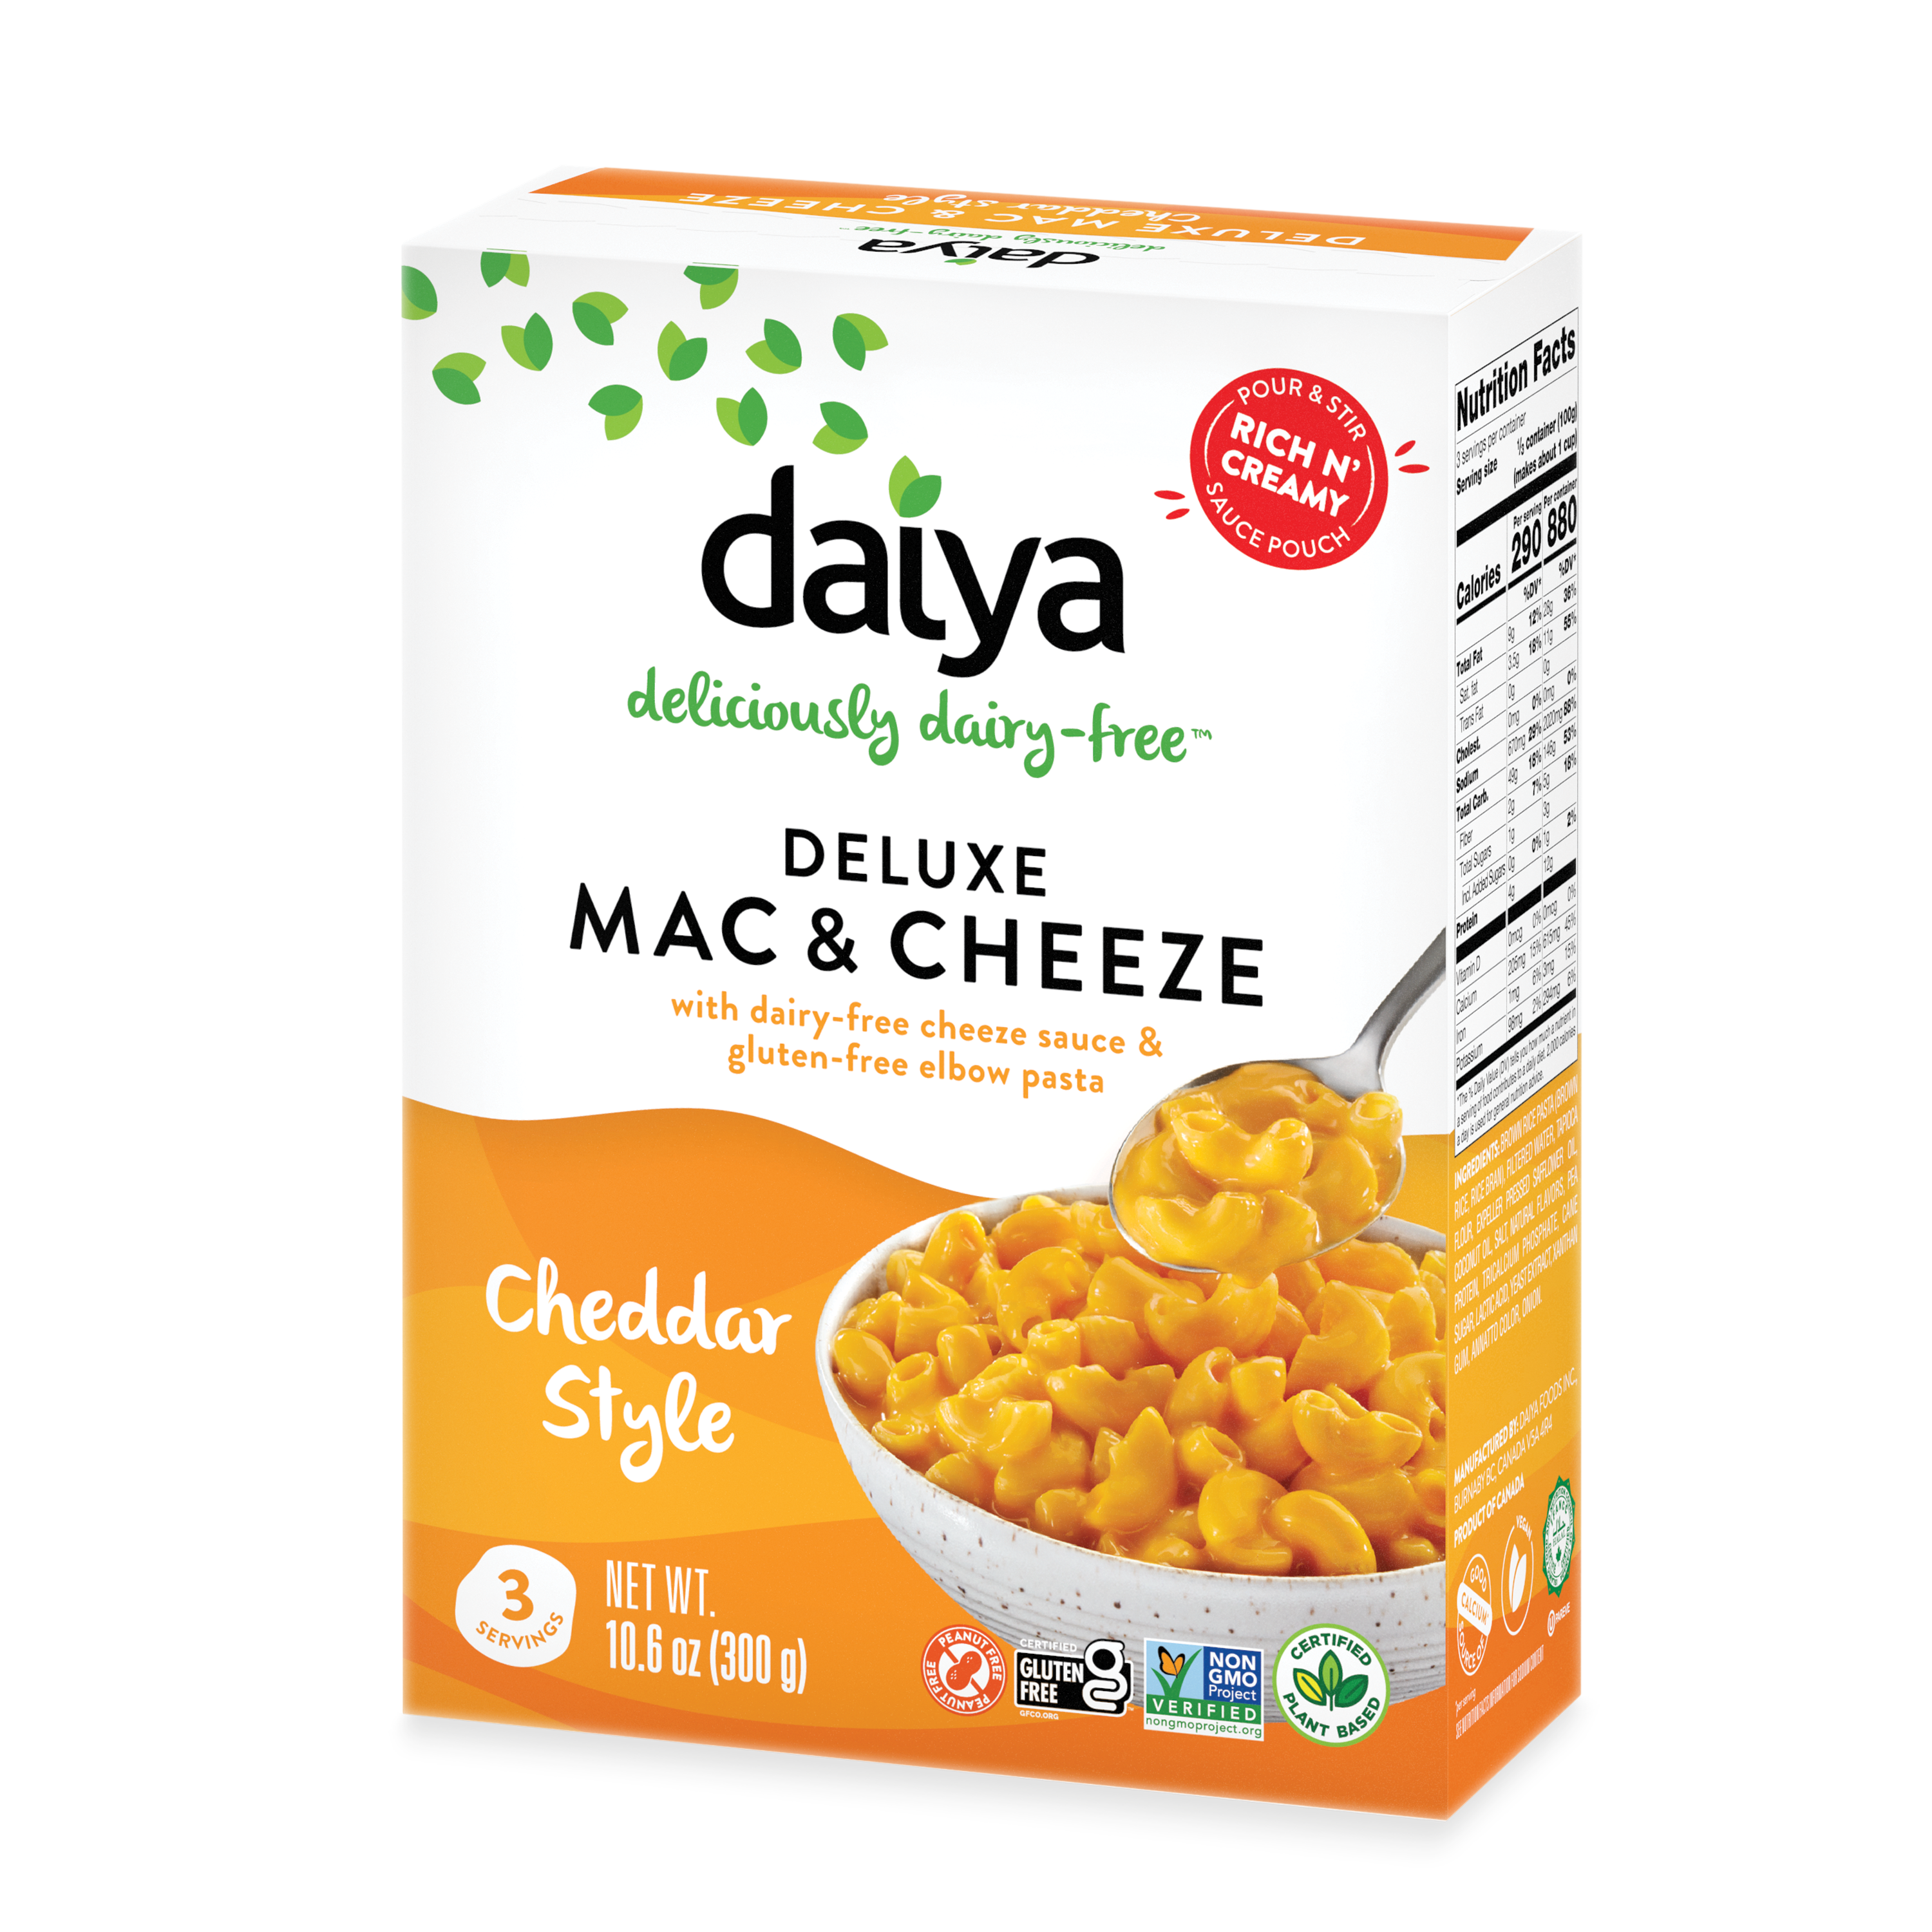 Cheddar Style Mac & Cheeze